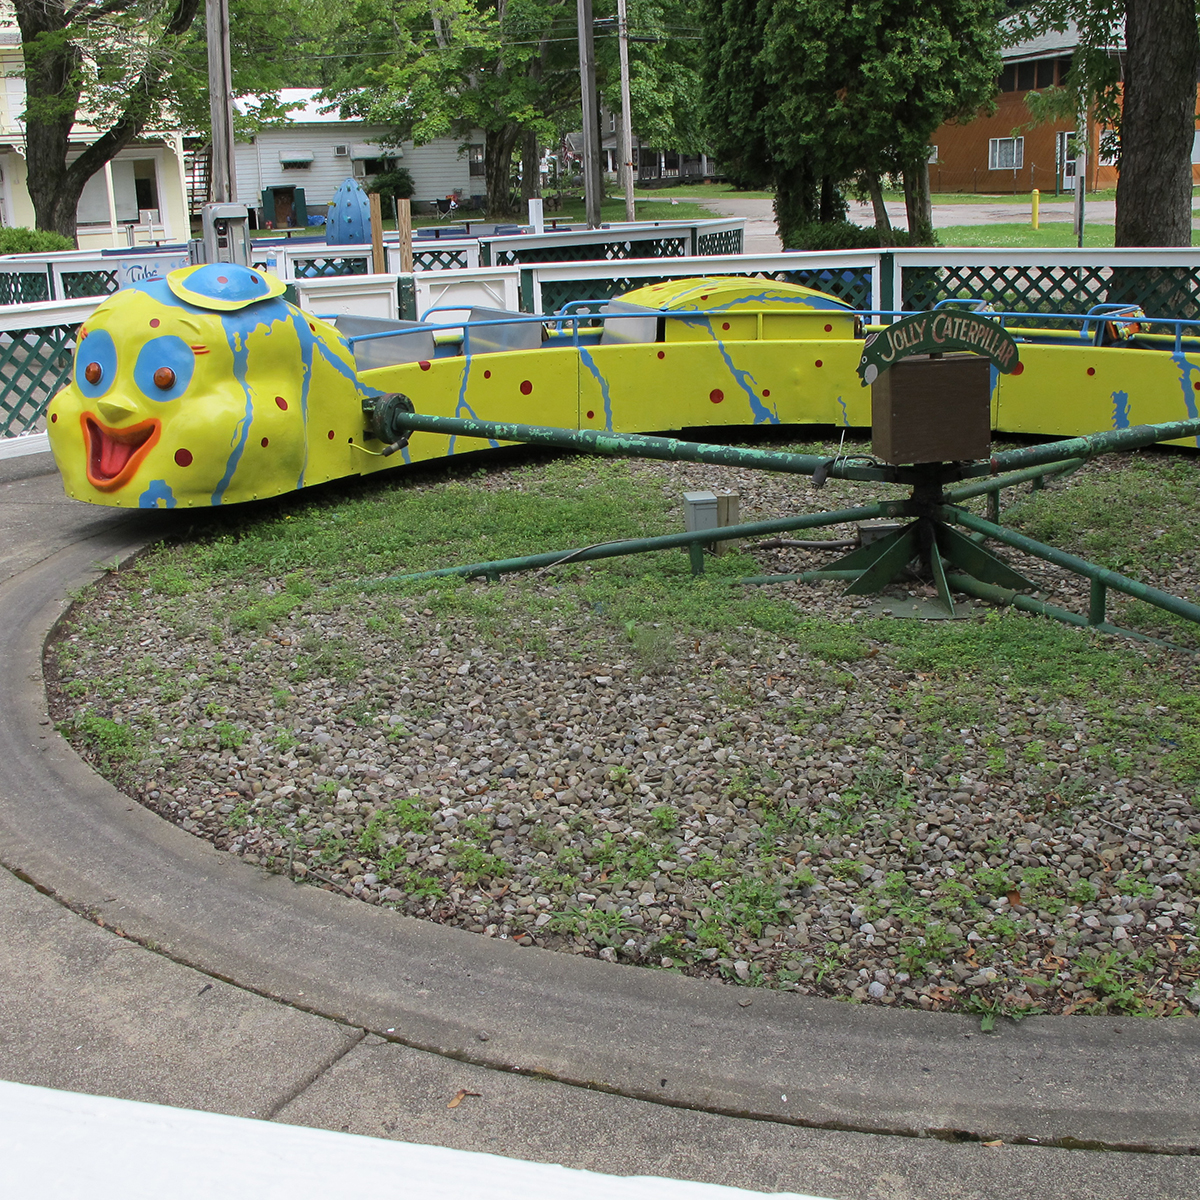 West View Park’s kiddie land ride, the Jolly Caterpillar, located today at Conneaut Lake Park in northwestern Pa., 2017. | Heinz History Center